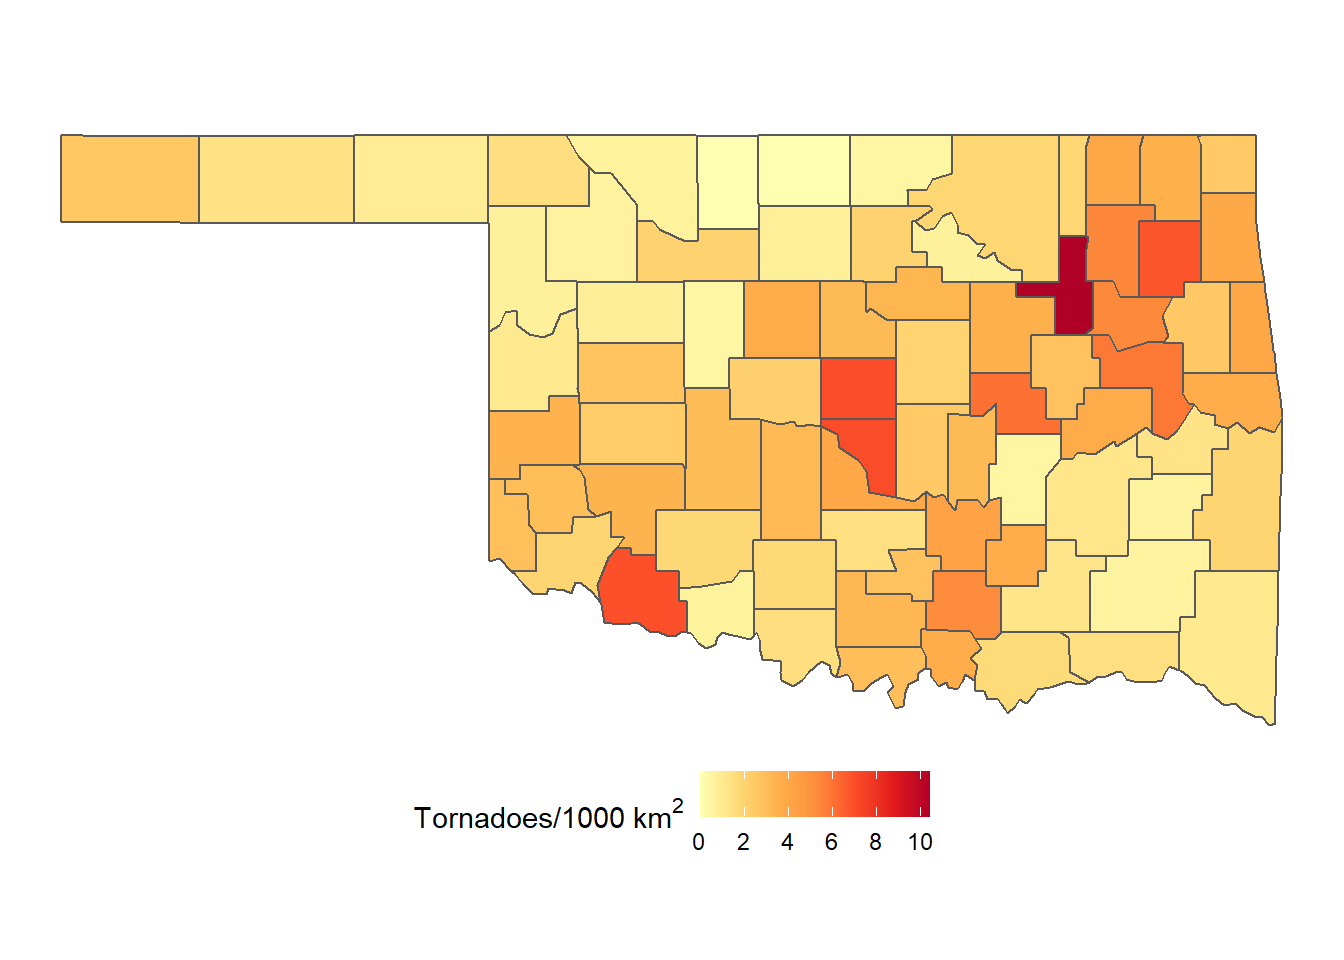 Densities of tornadoes in Oklahoma counties from 2016-2021 mapped as a choropleth with a custom palette.